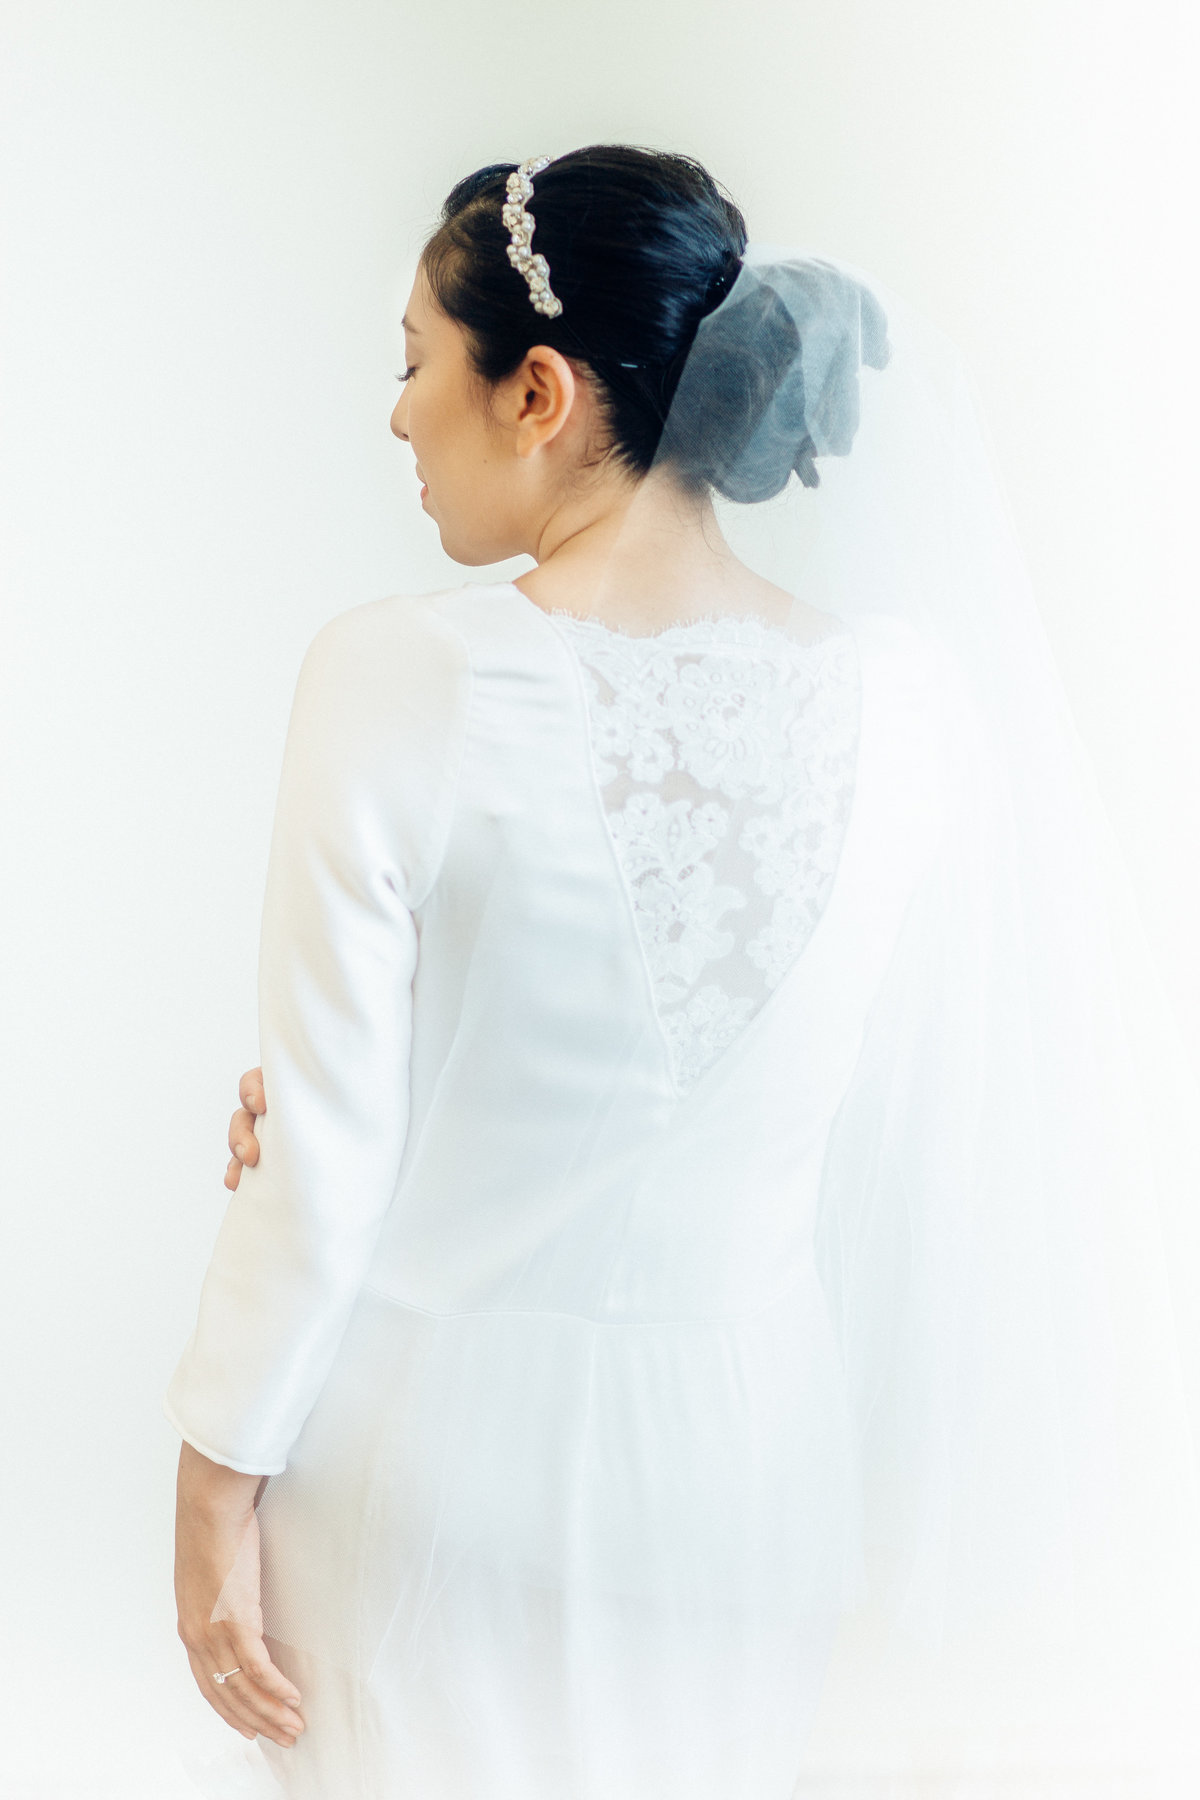 Wedding Photograph Of Bride Standing  in White Dress Los Angeles